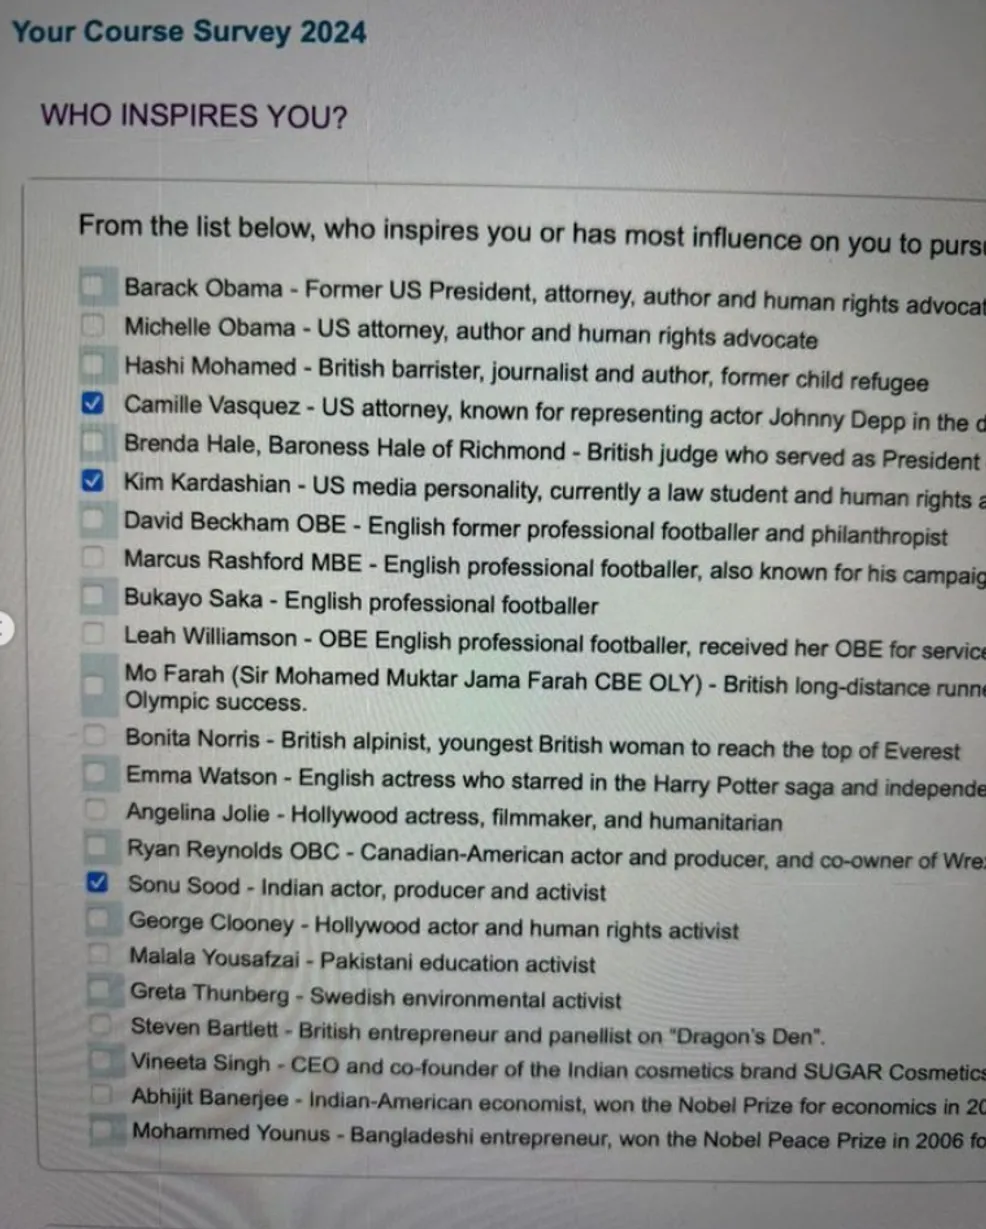 Sonu Sood name appears in a law survey along with Barack Obama Angelina Jolie David Beckham and others